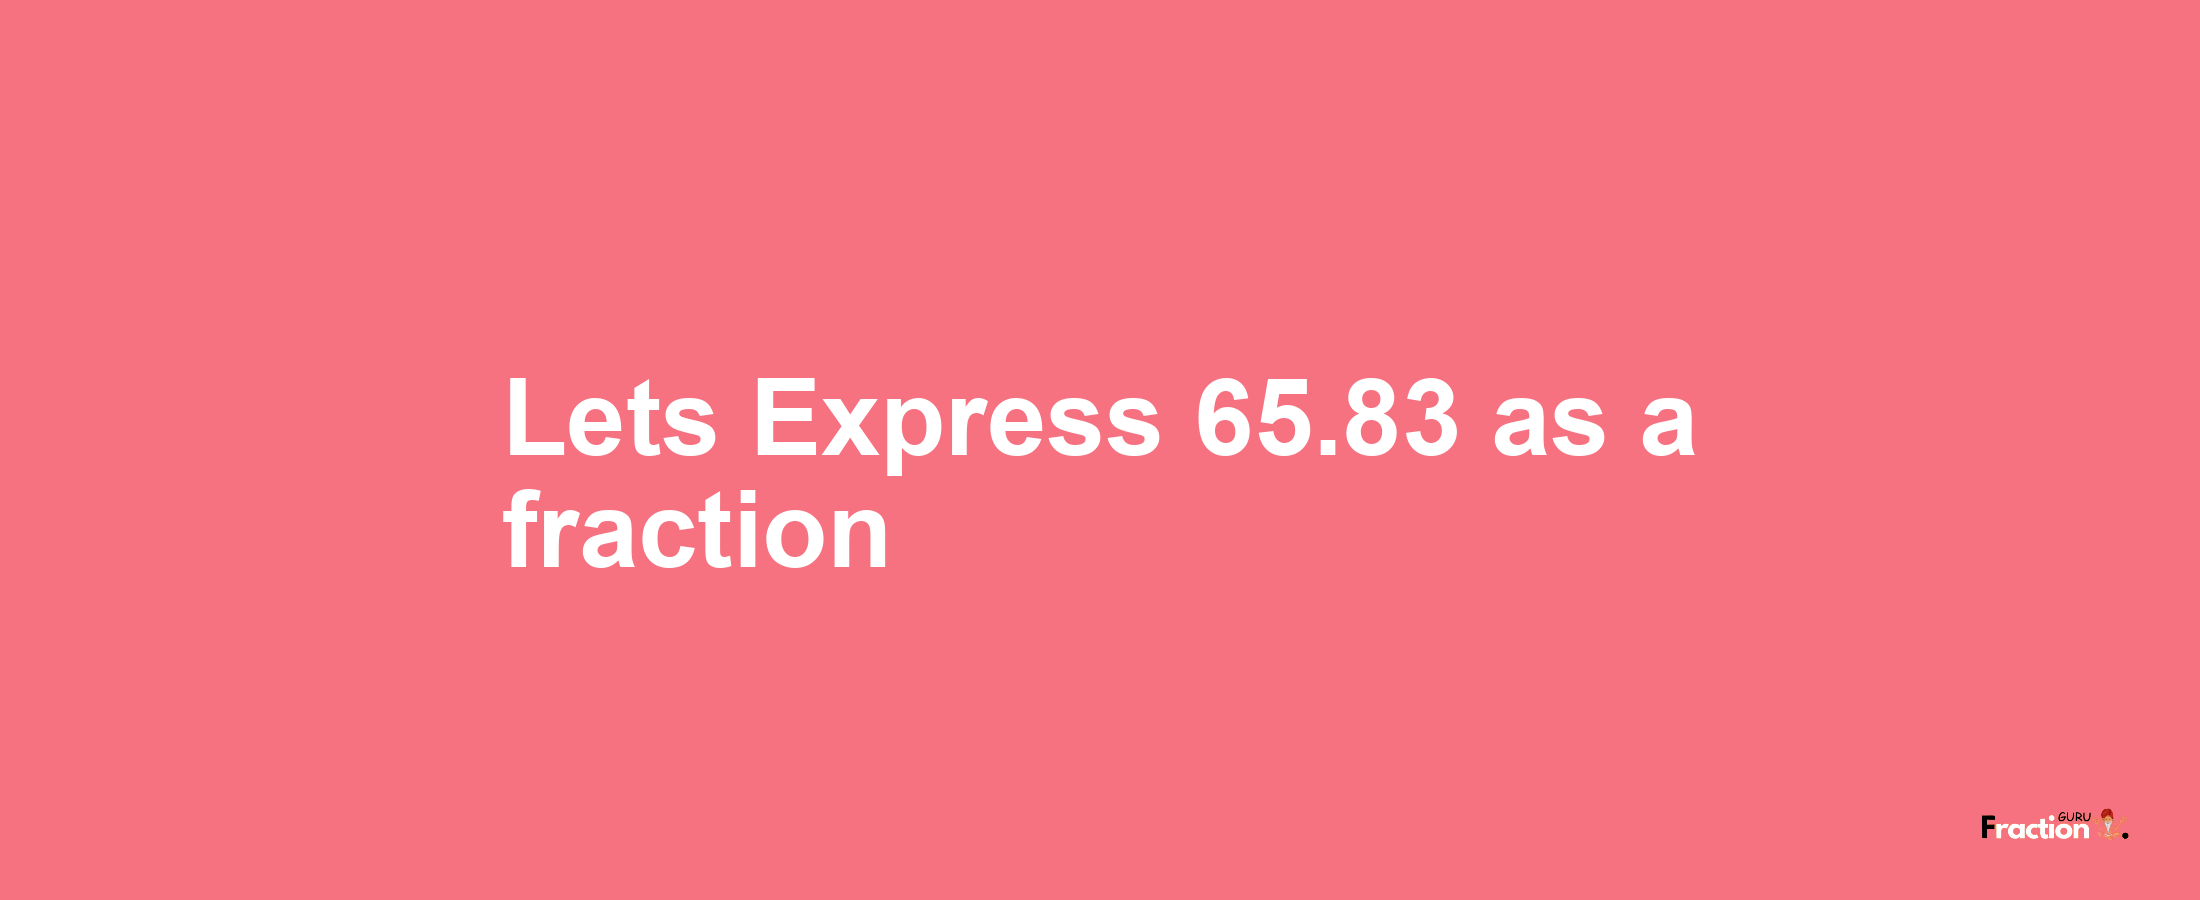 Lets Express 65.83 as afraction